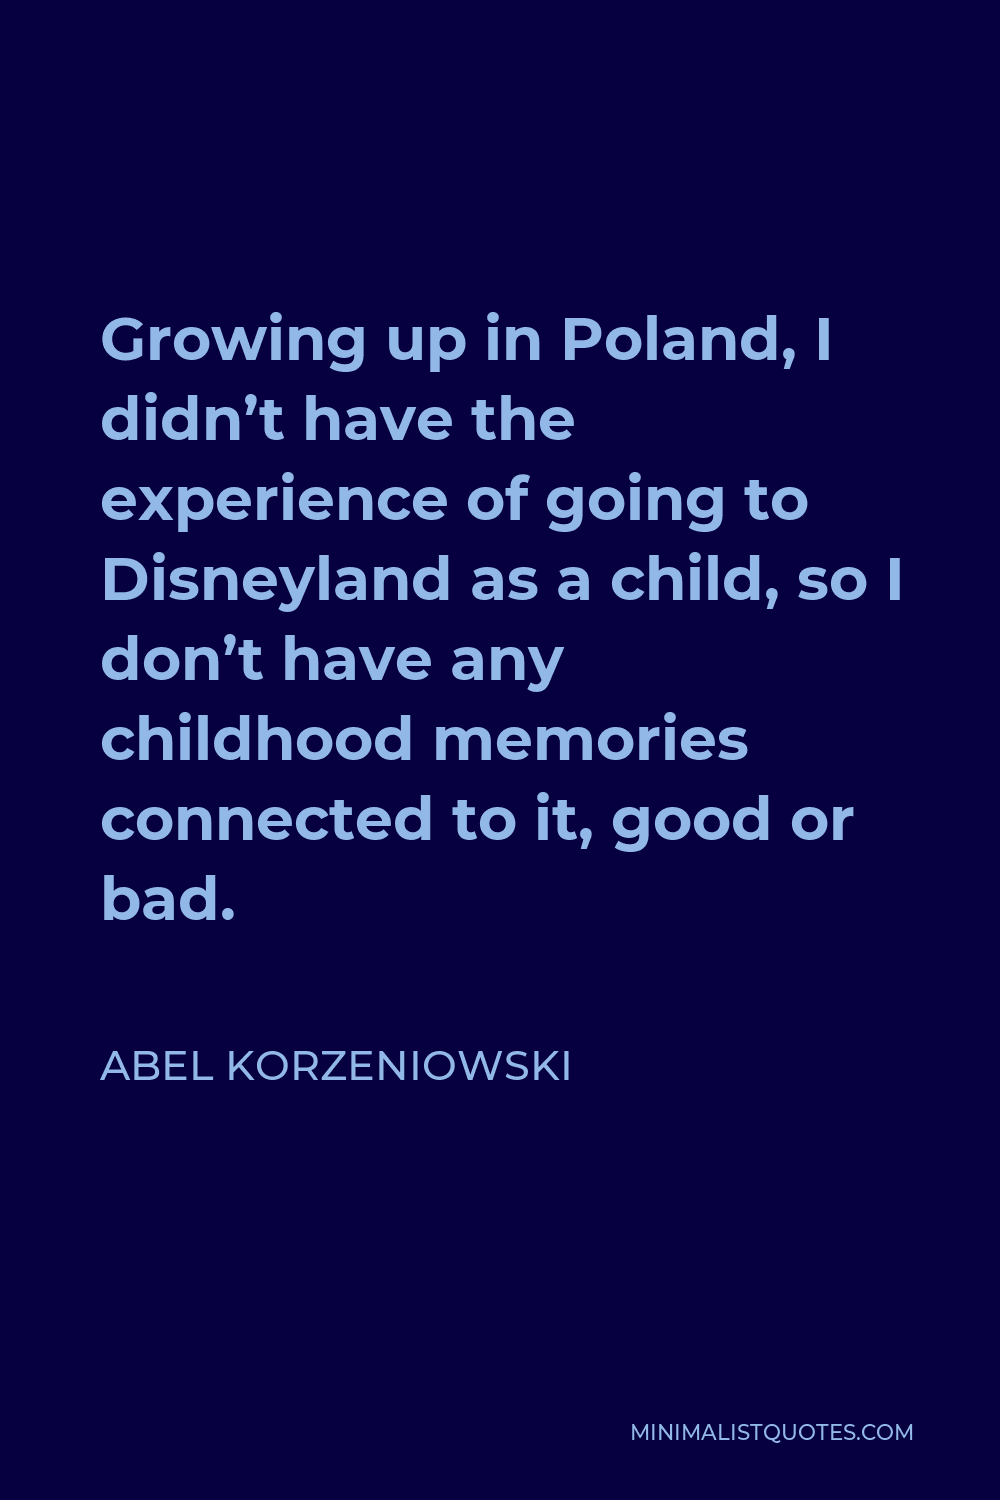 Abel Korzeniowski Quote - Growing up in Poland, I didn’t have the experience of going to Disneyland as a child, so I don’t have any childhood memories connected to it, good or bad.